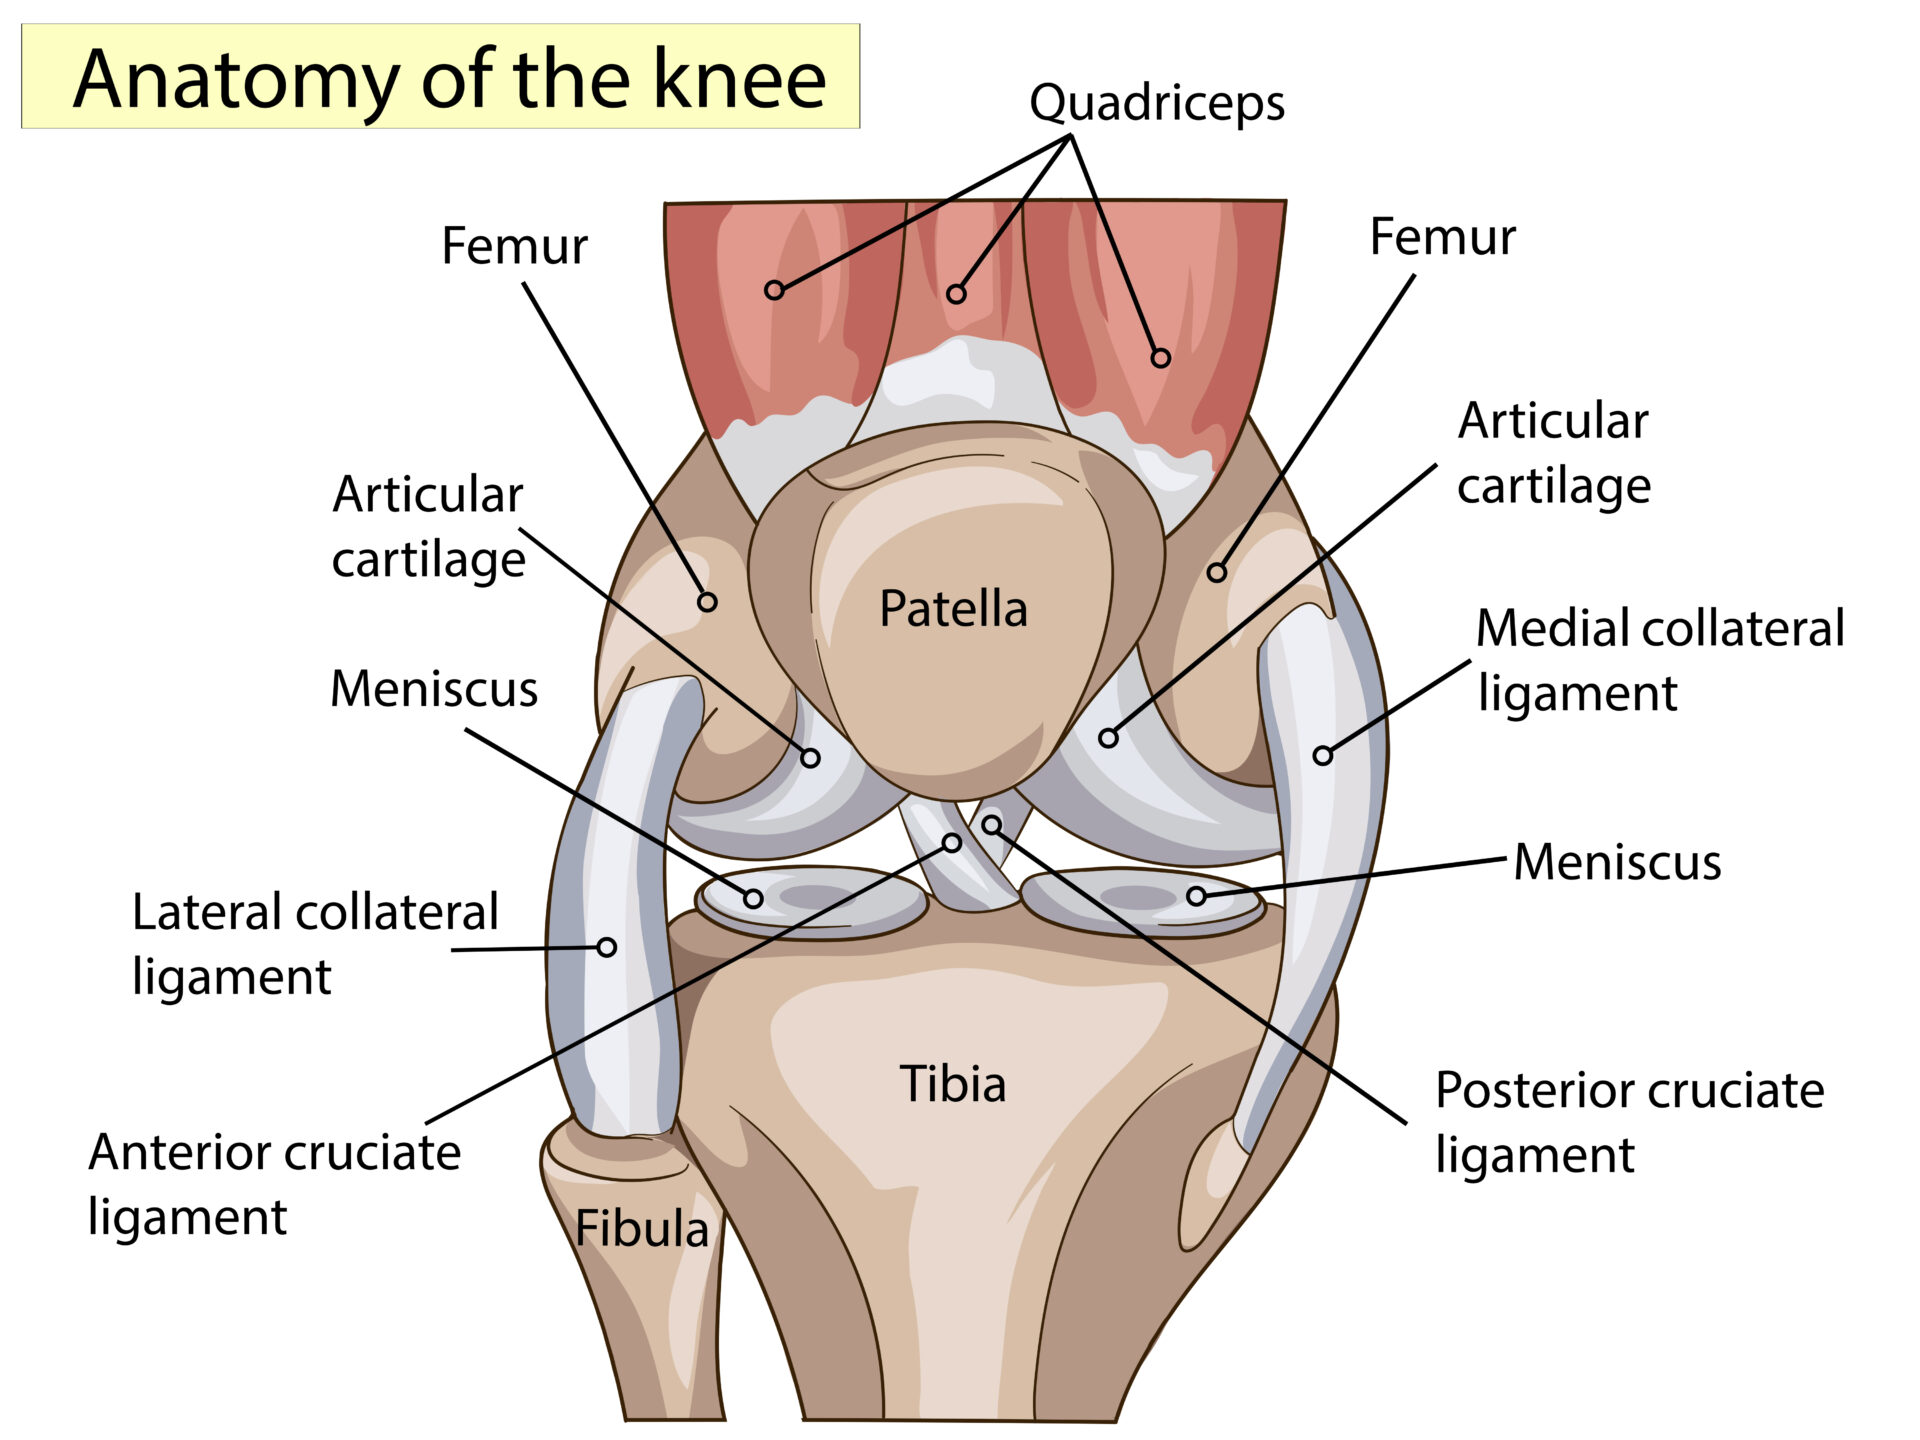 Cross-section illustration of the anatomy of a knee joint with bones, ligaments, cartilage, and muscles labeled.